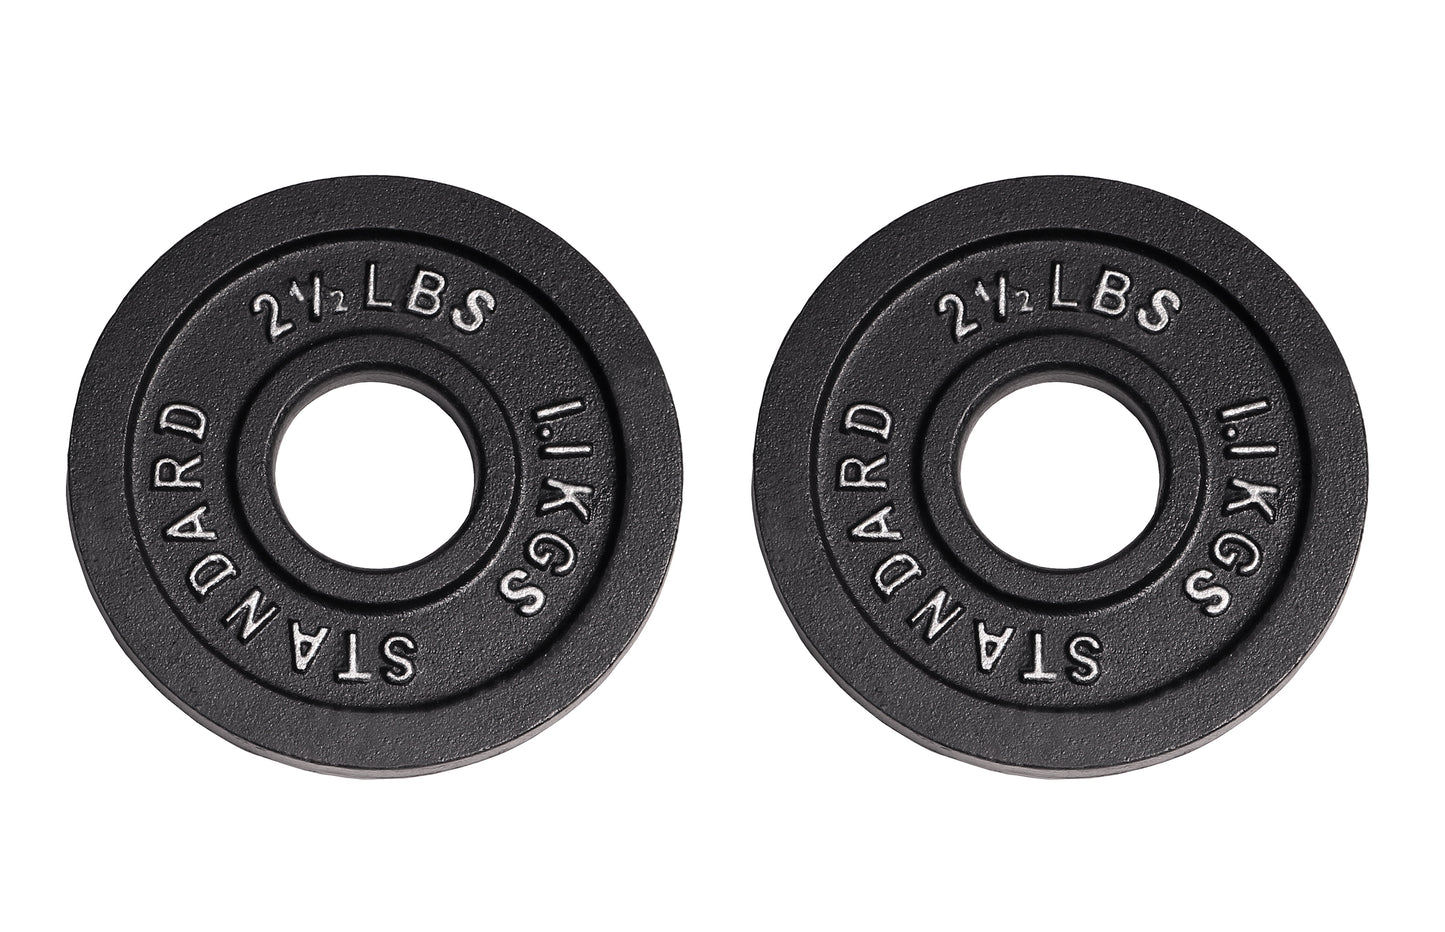 Deltech Fitness 2-1/2 lb Pair of Olympic Plates (OP-0025)